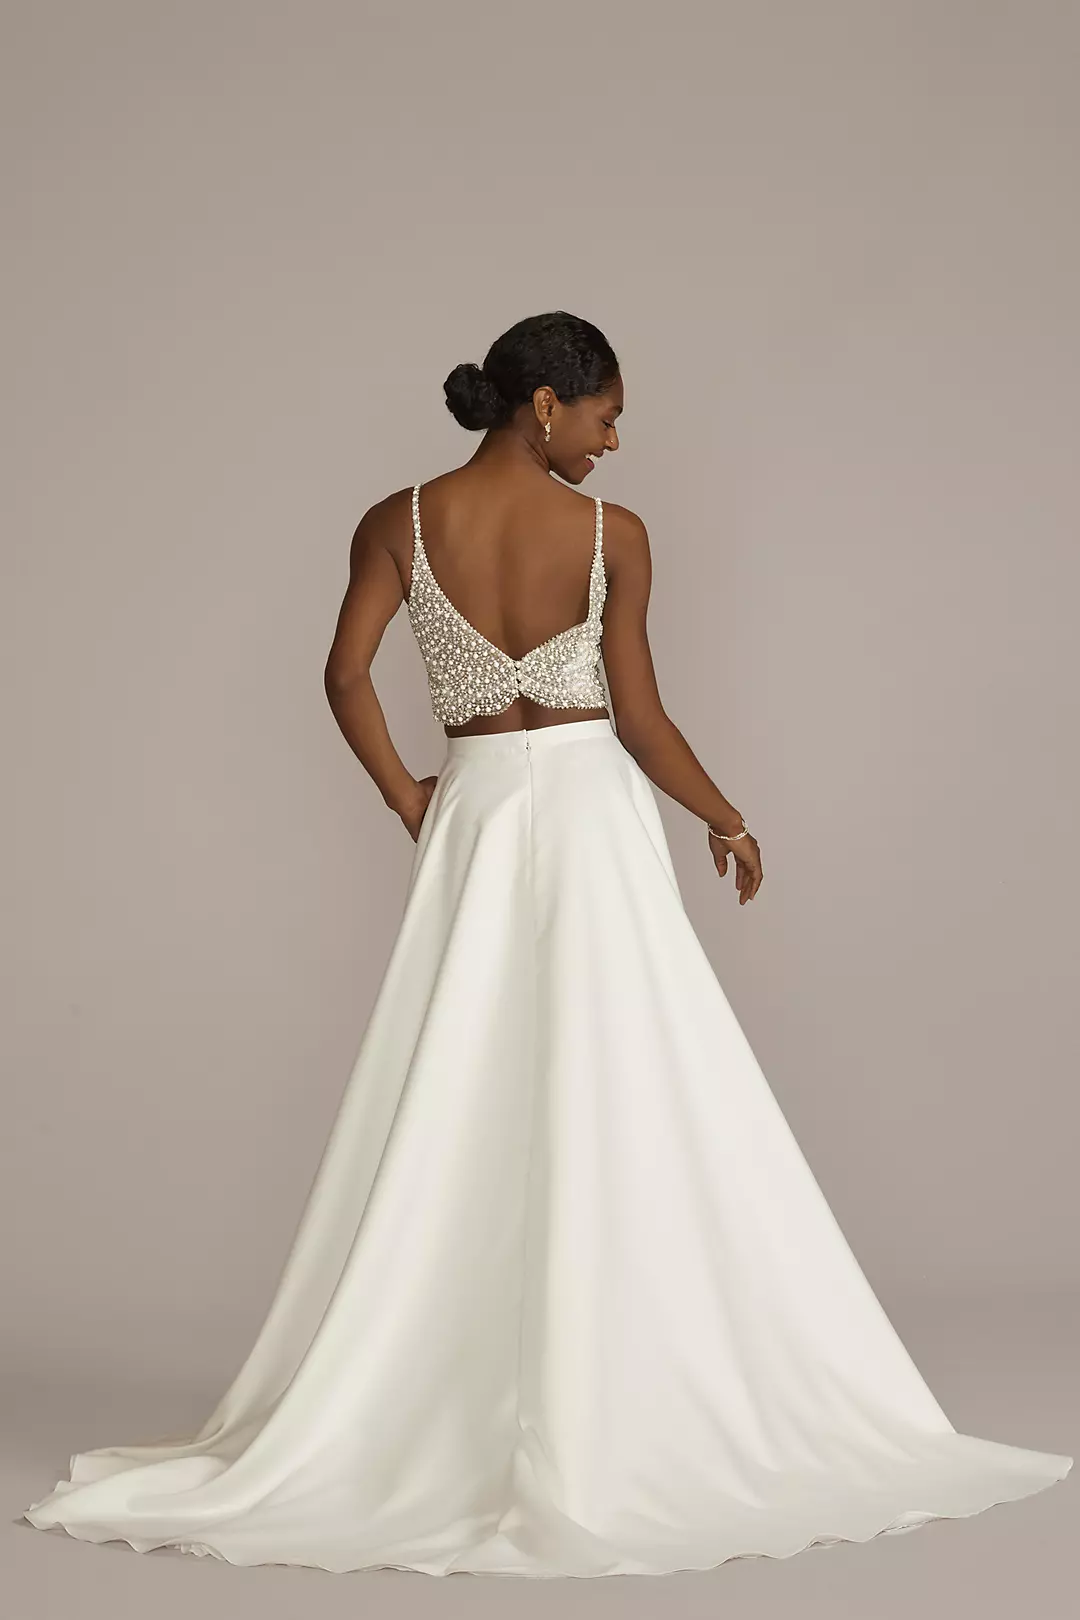 Separates wedding dress composed by a lace bodysuit with open back, a satin  crop top under it and a long satin skirt with pockets